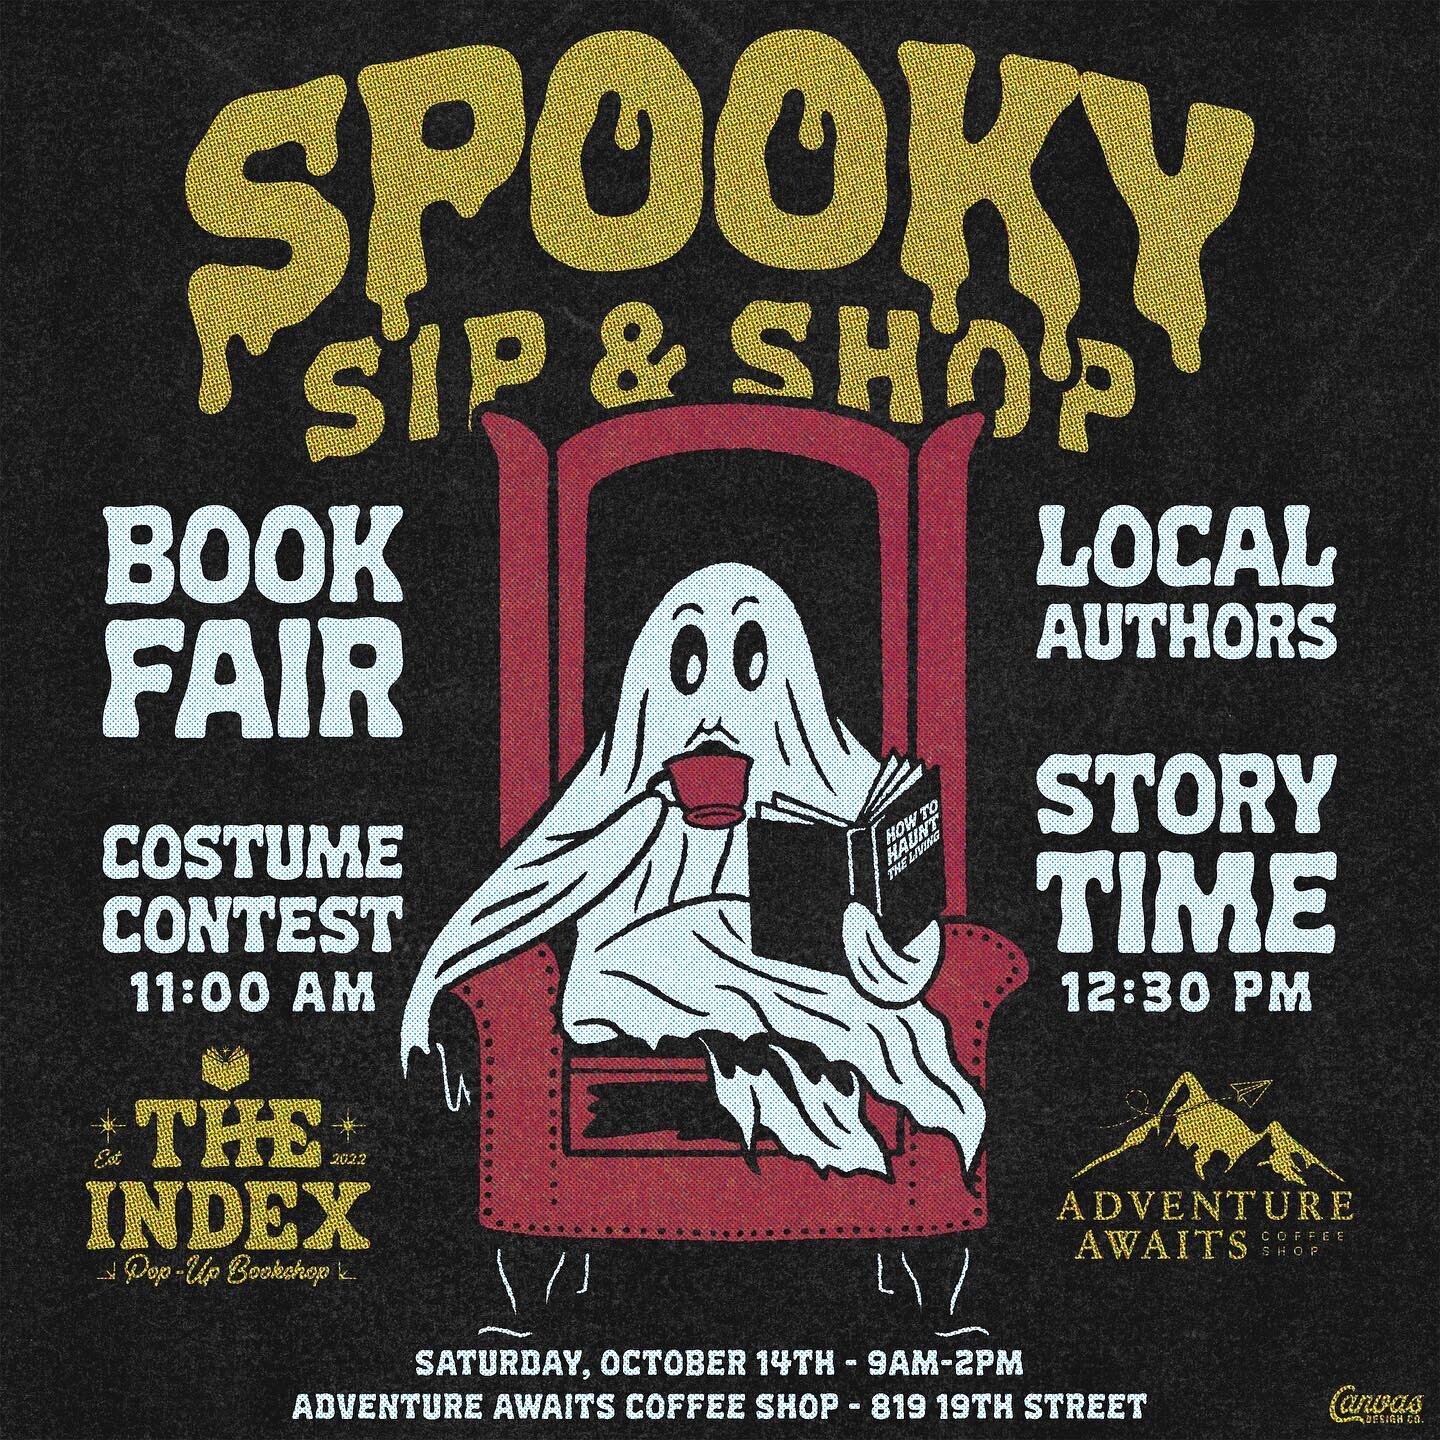 Spooky season is upon us! 👻 📖 
Here&rsquo;s a graphic we designed for @theindexbooks &amp; @adventureawaits_coffeeshop Spooky Sip and Shop event!
This little ghost was a lot of fun to illustrate. Definitely our favorite style to draw. 
Hire us for 